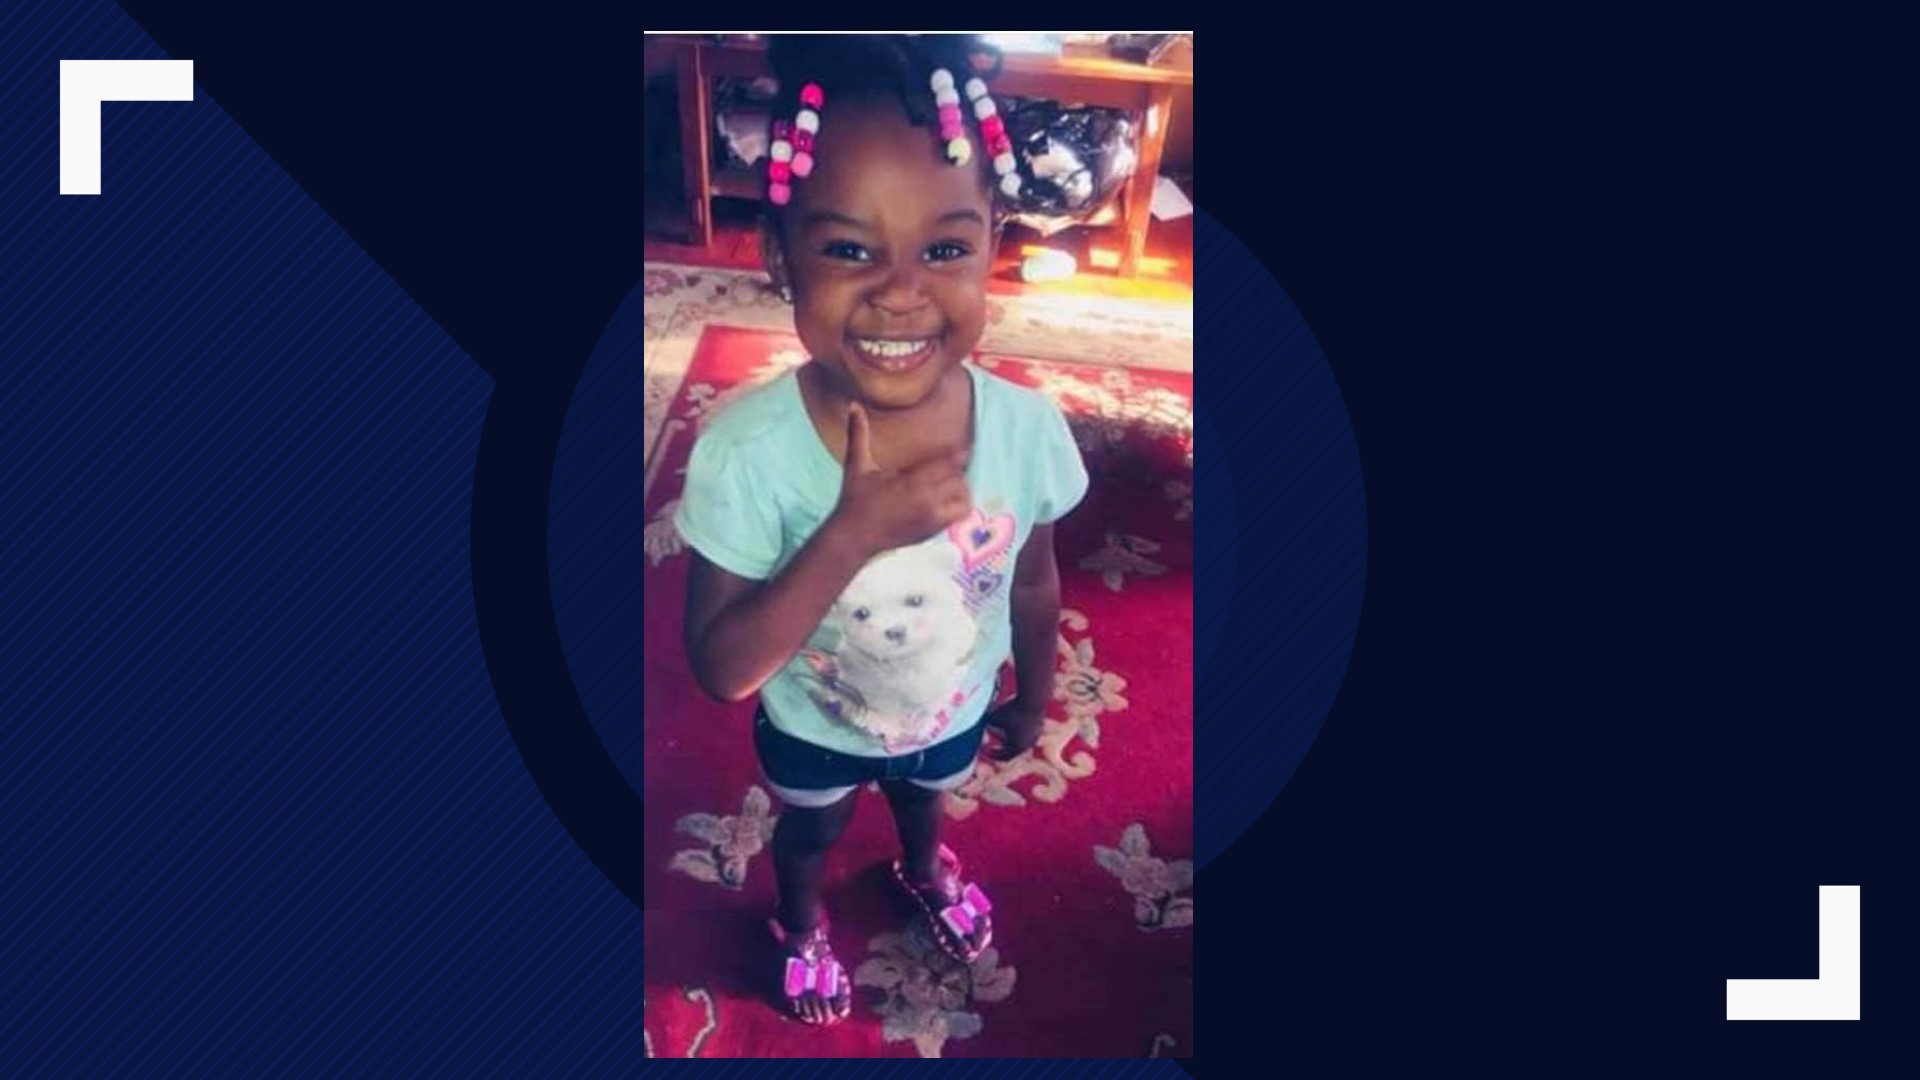 3-year-old Janiyah Armanie Brooks was severely beaten and sexually abused, police in Albany, Georgia, said. Her stepfather and mother are now facing charges, which could be upgraded.